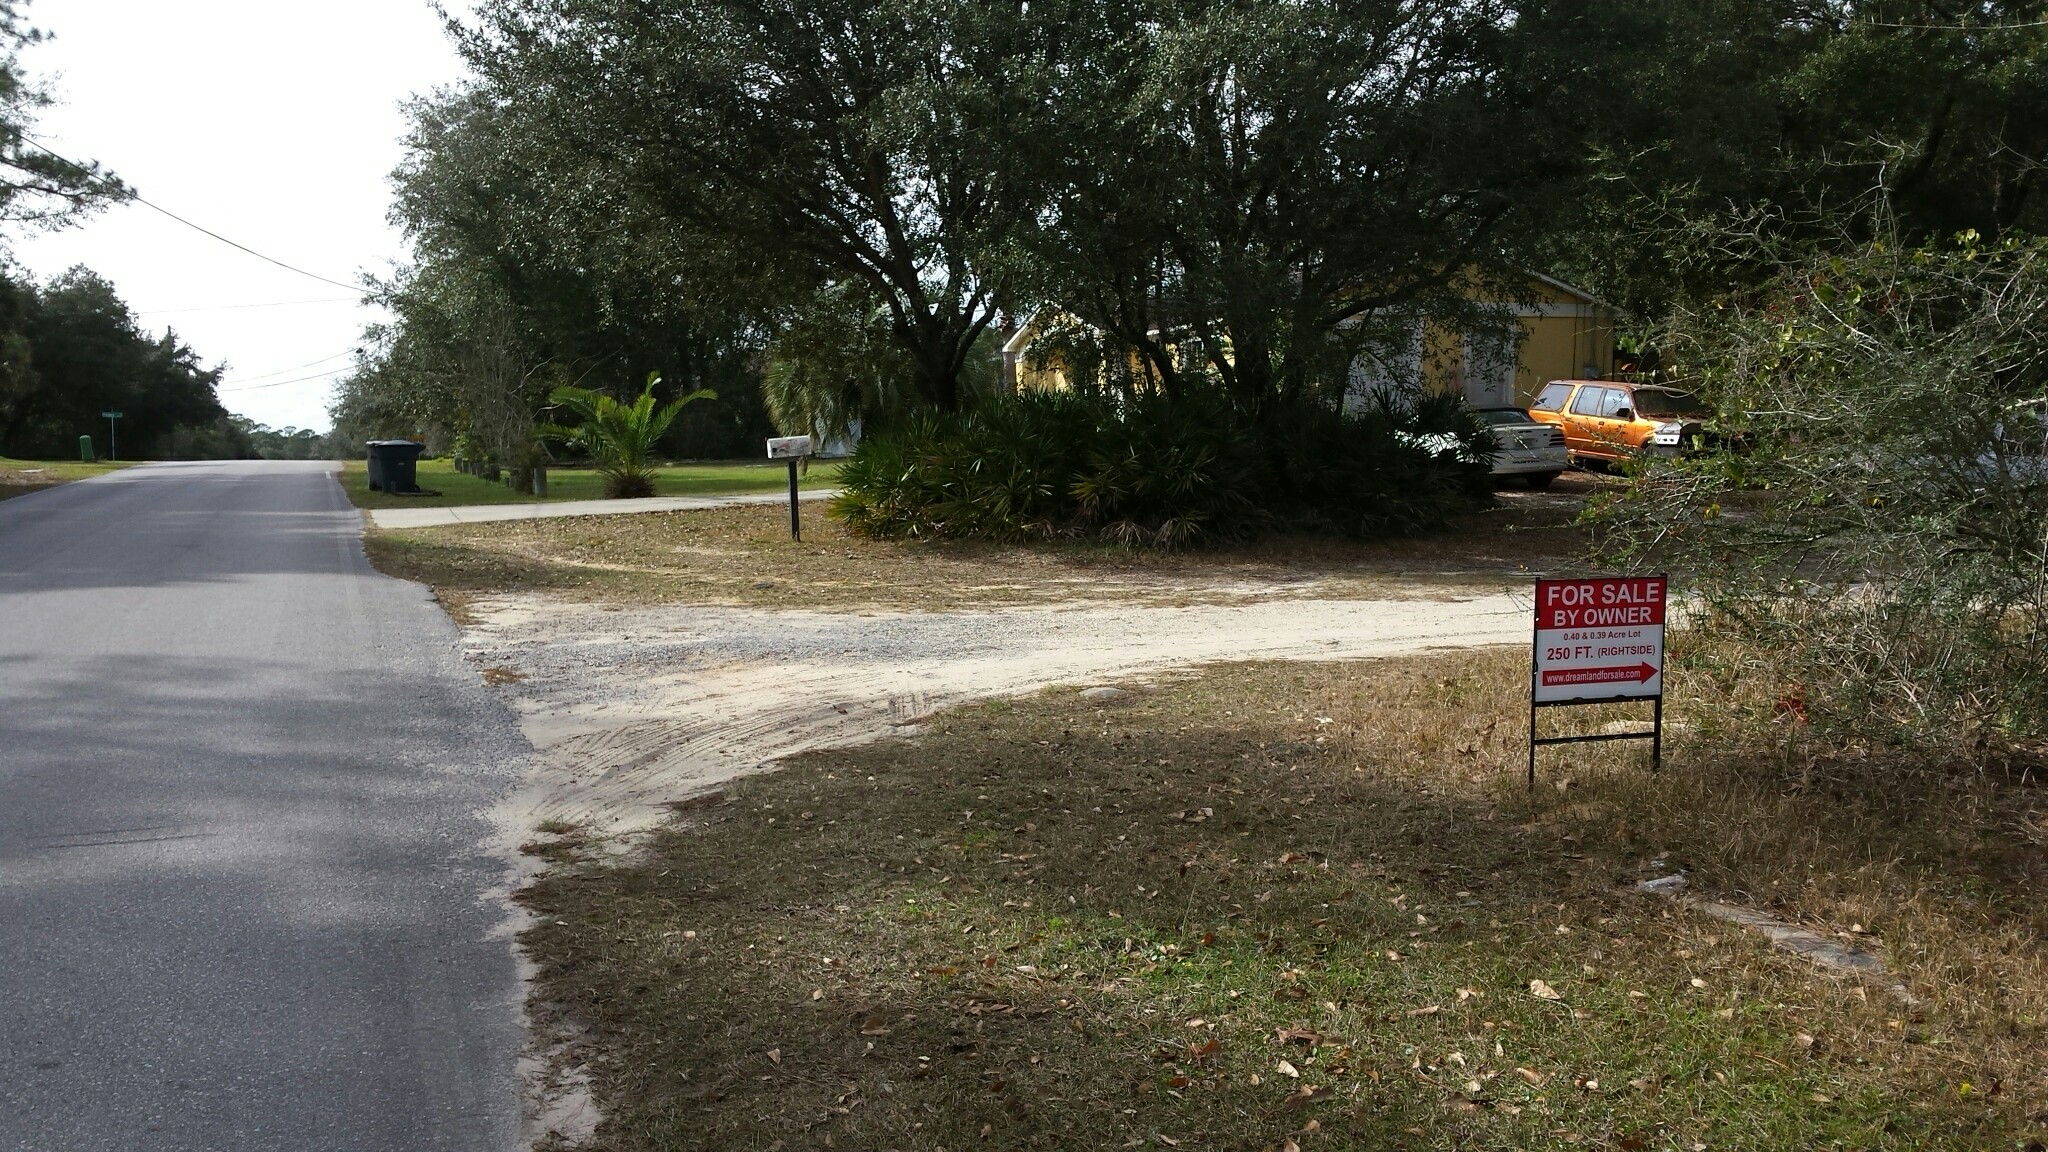 Dirt Drive Leading To The Property From Seratine Dr.